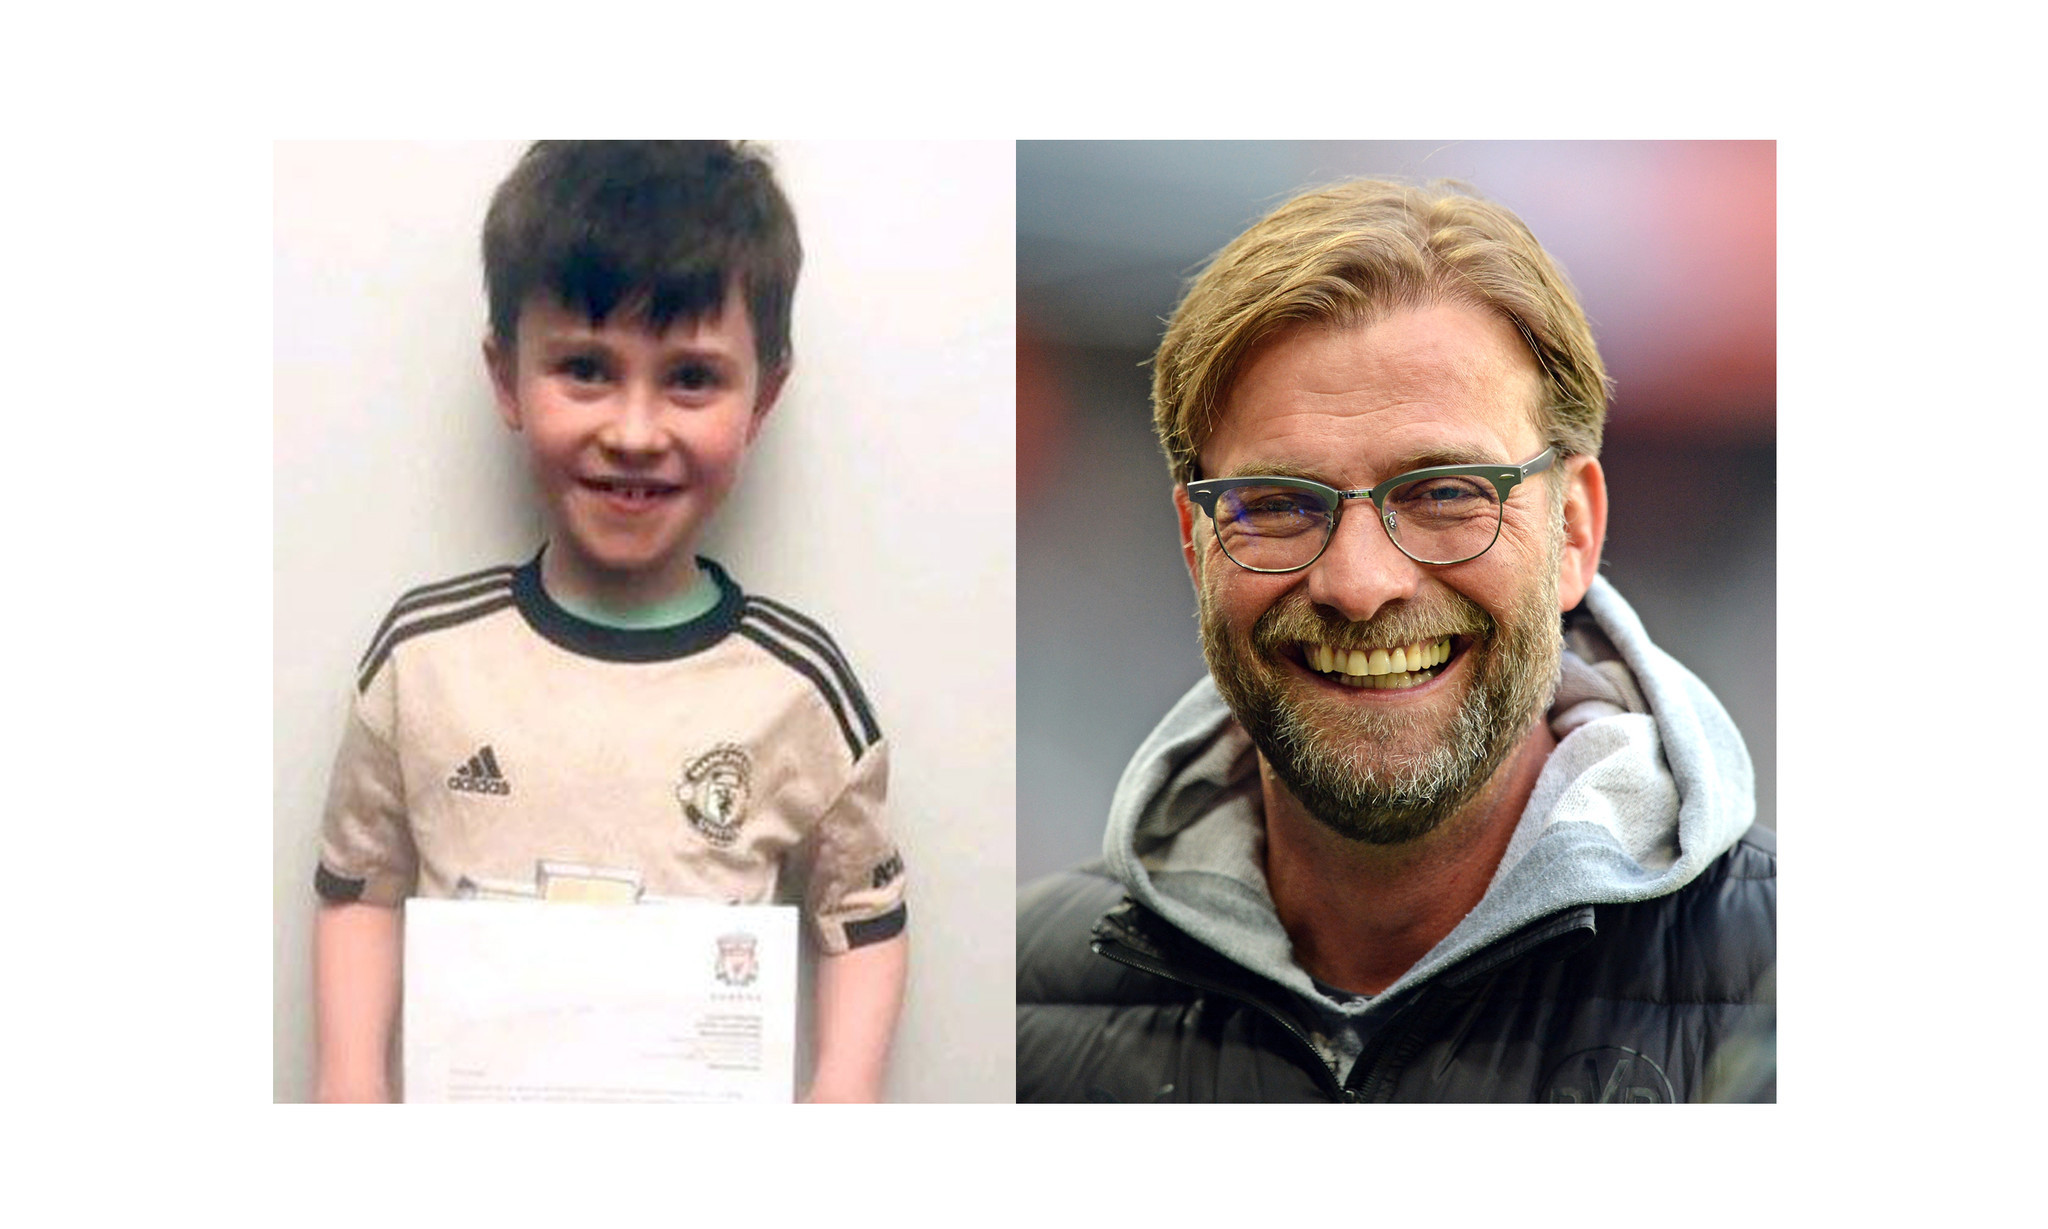 10-year-old soccer fan writes letter asking Liverpool coach to lose a match — and gets a response